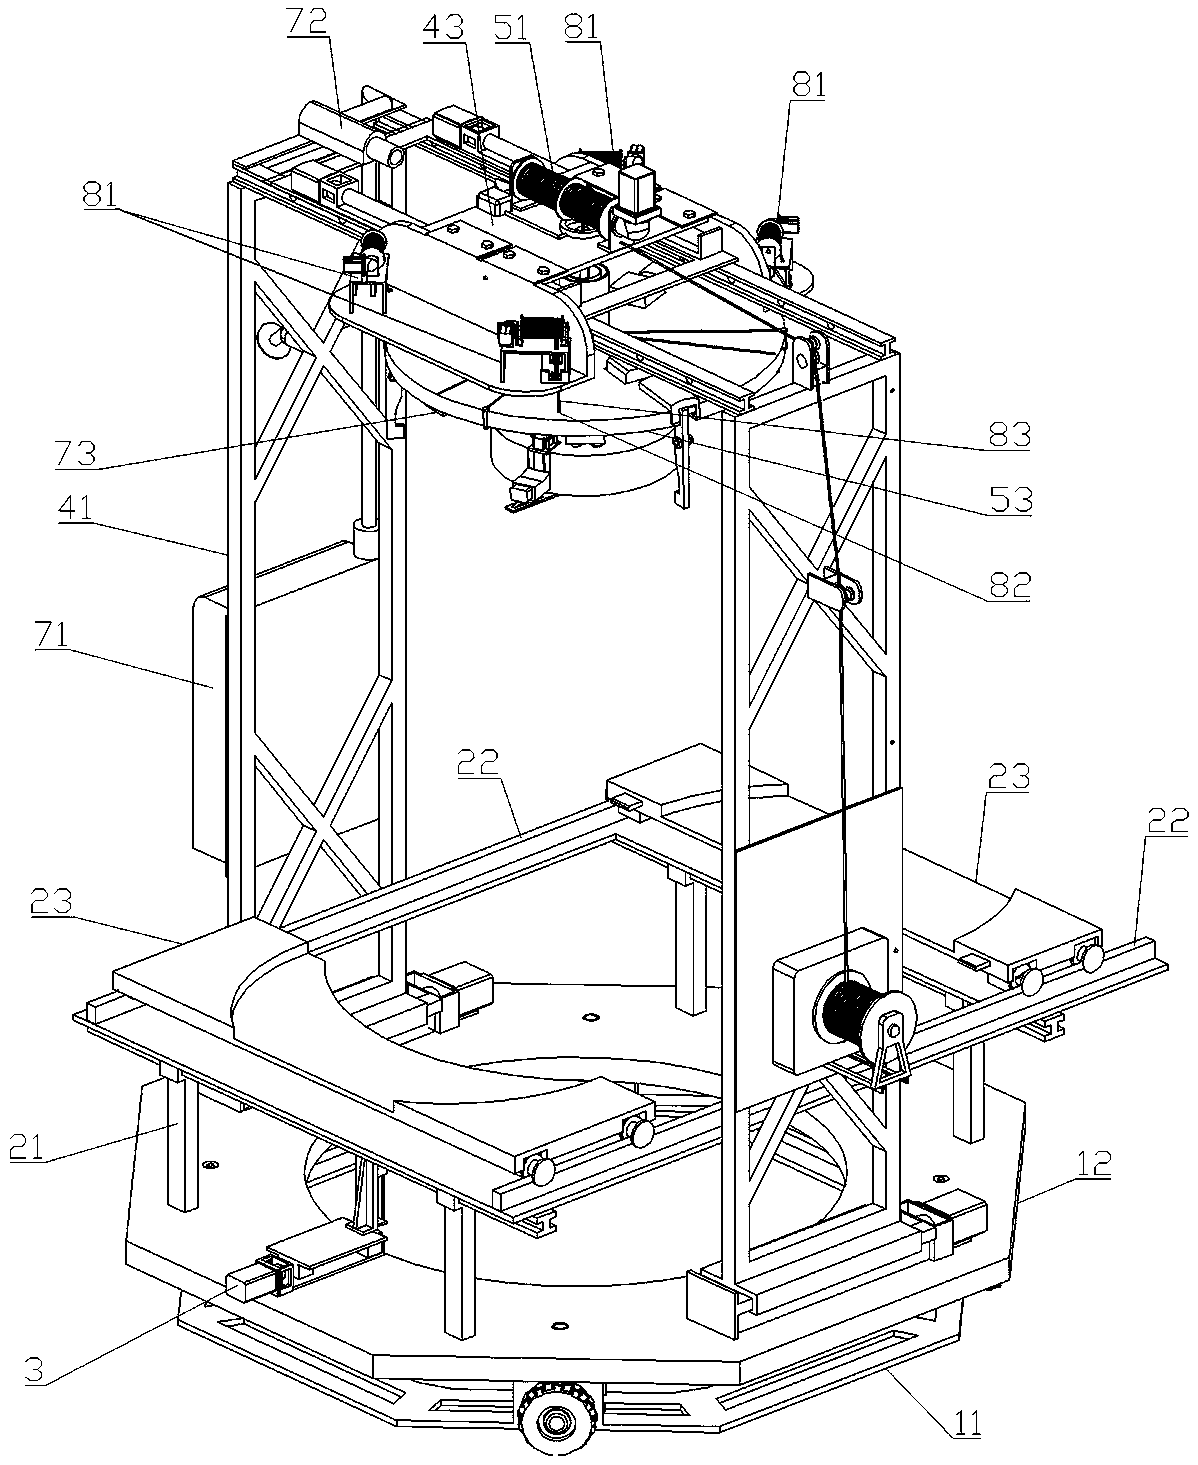 Deep well curing barrel hoisting system and method